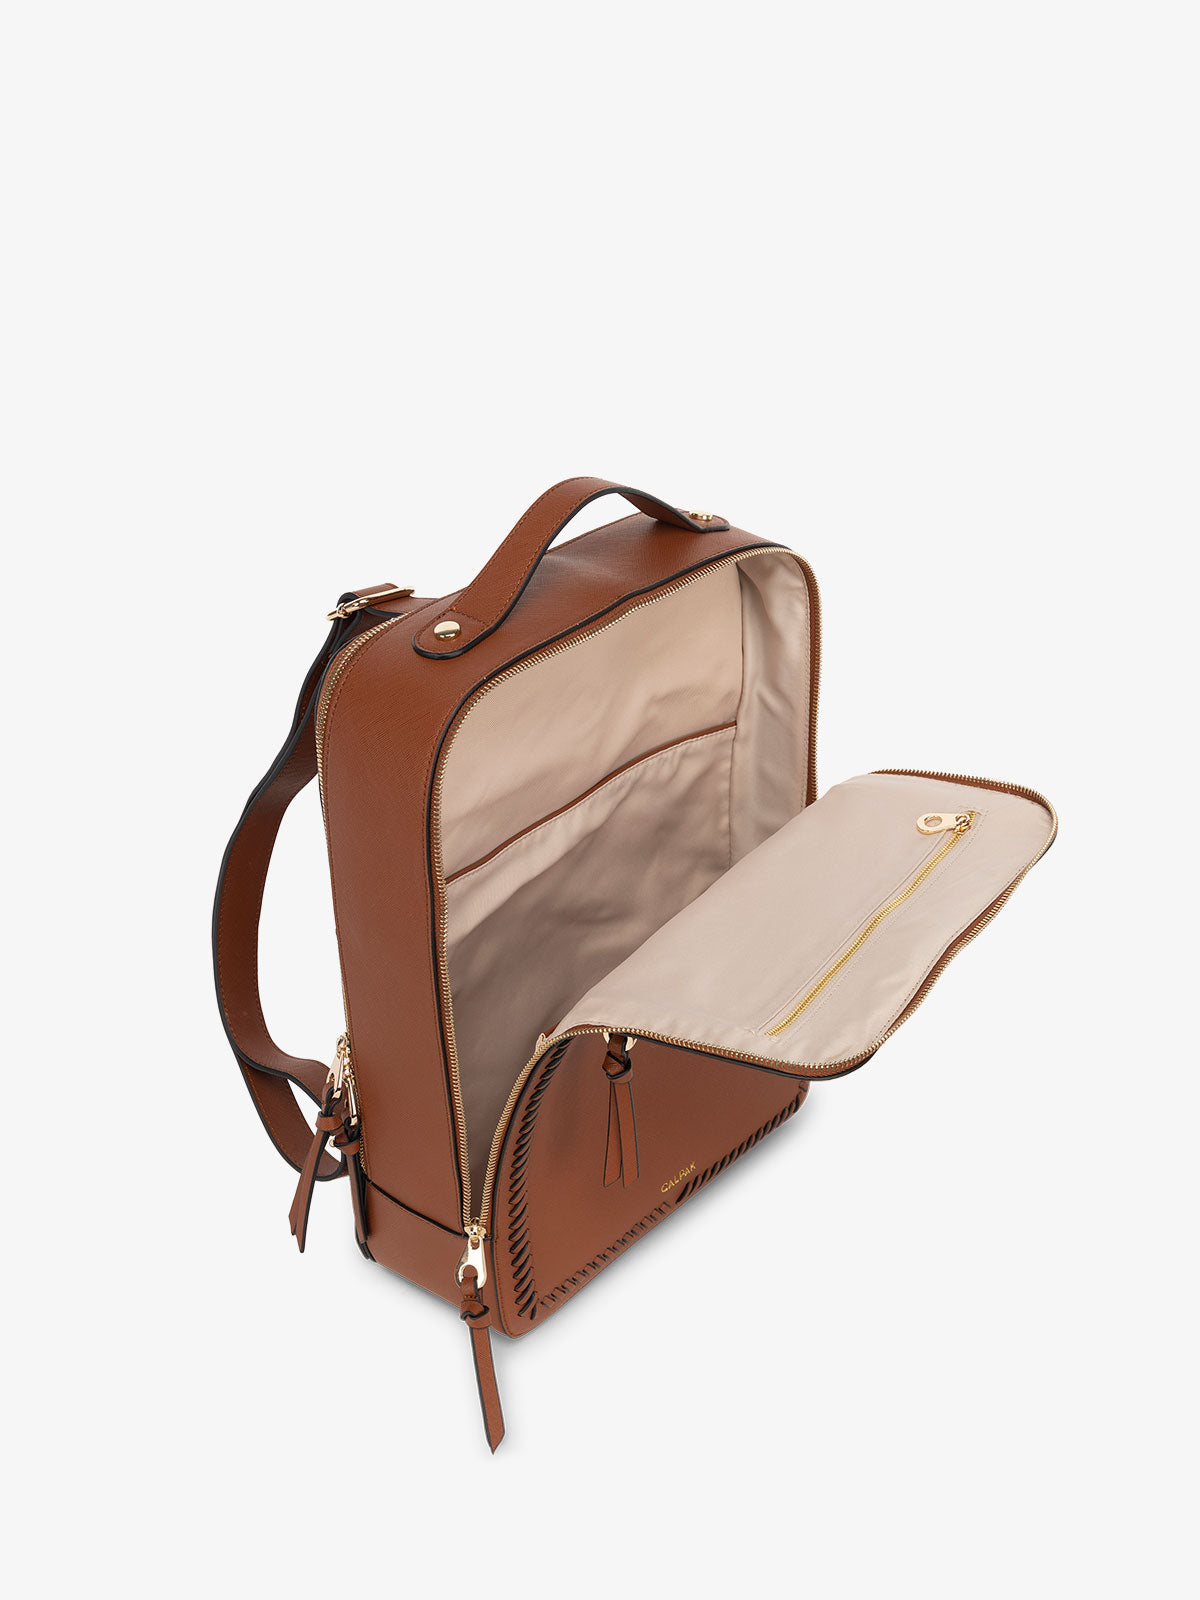 CALPAK Kaya Laptop Backpack for school with multiple pockets and laptop compartment in ginger brown